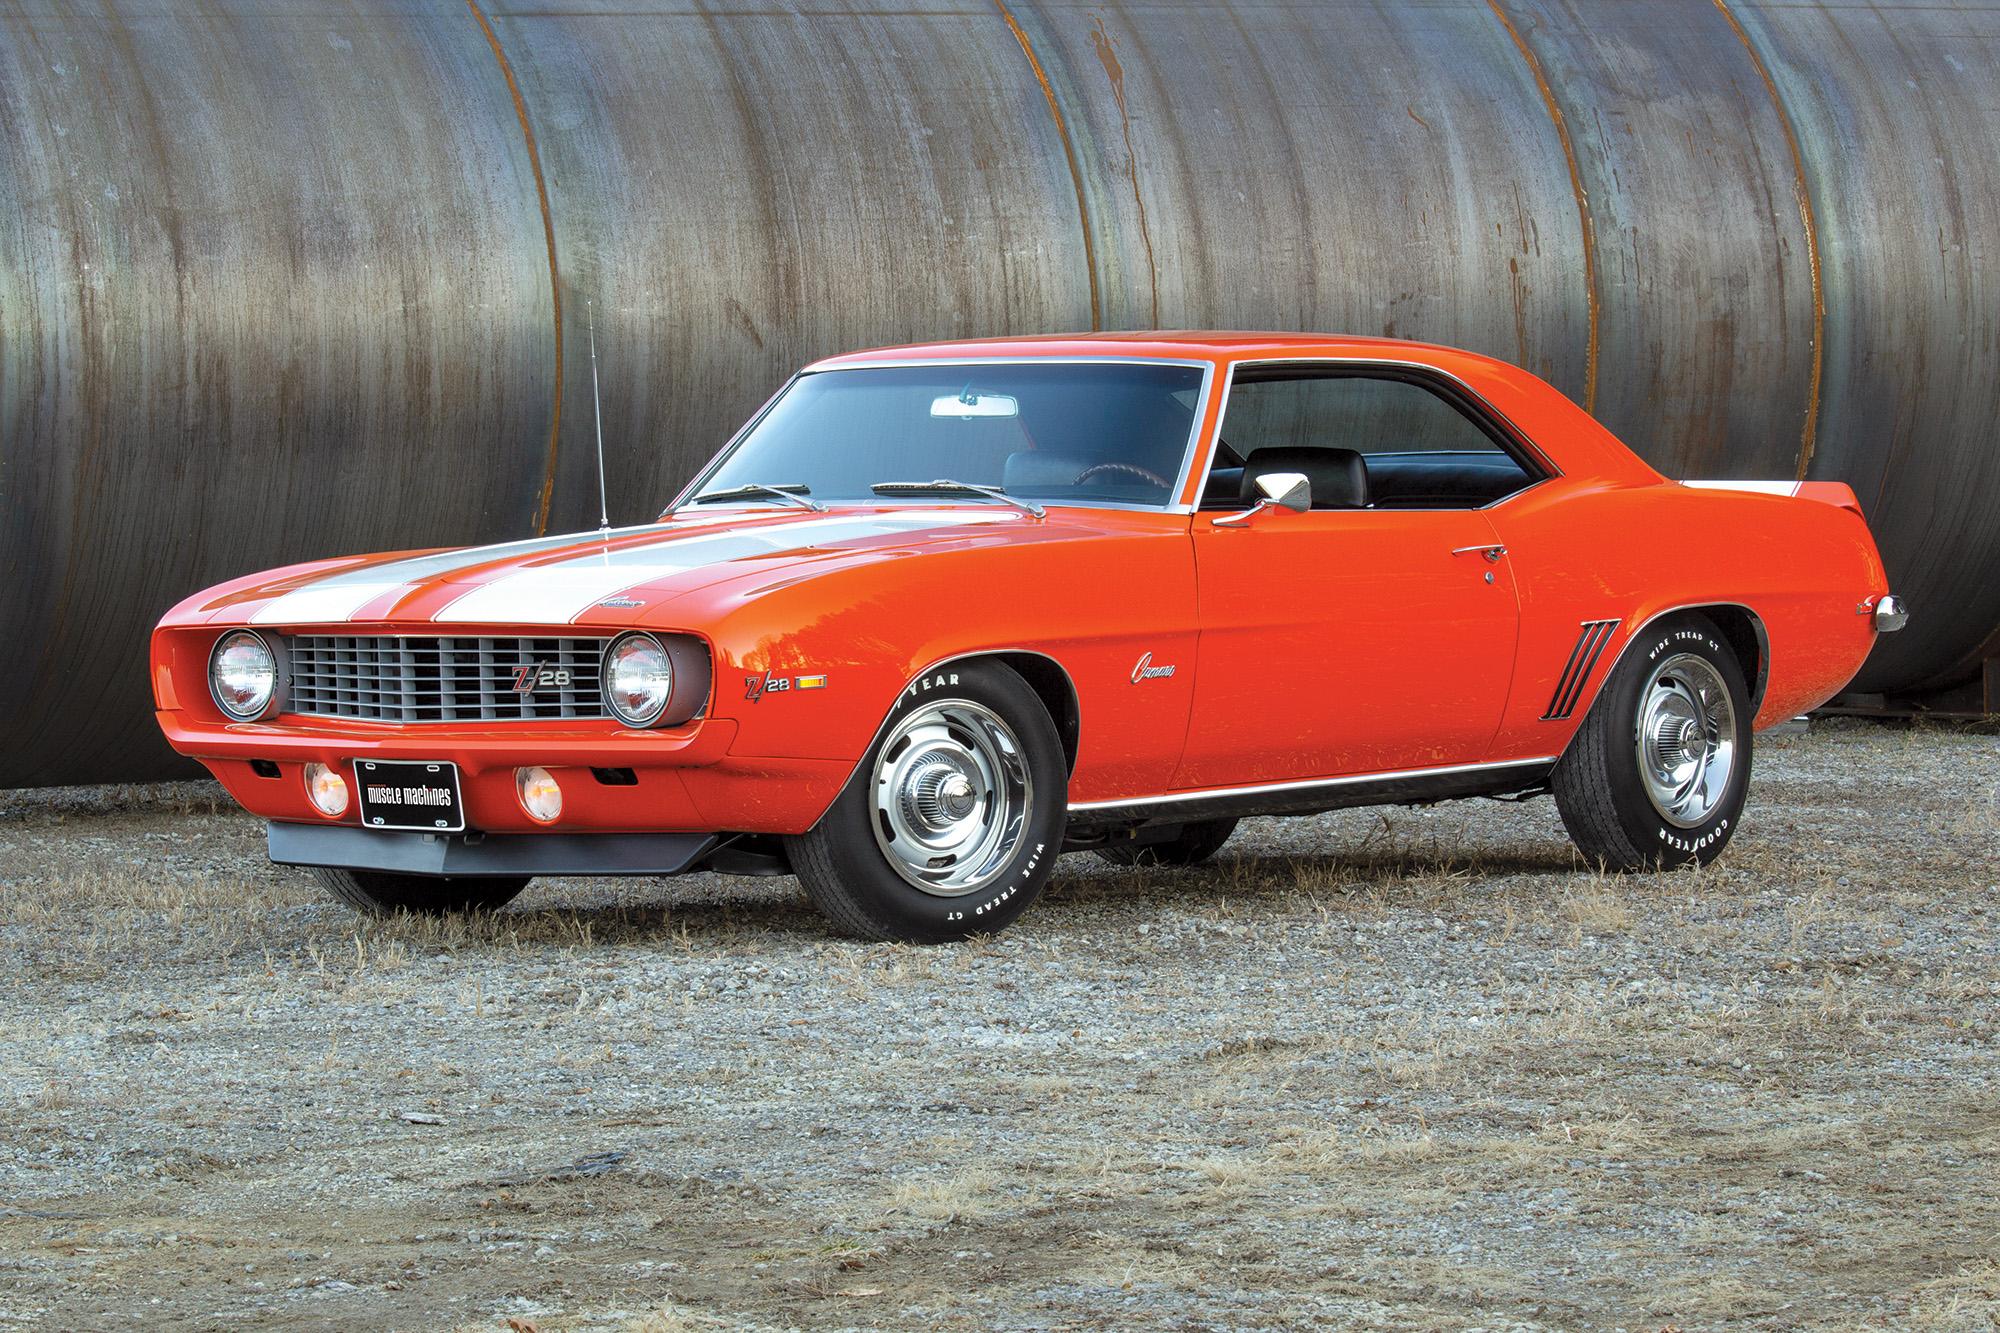 Original Examples of the Chevrolet Camaro Z/28 Continue to Command Strong Prices From Collectors